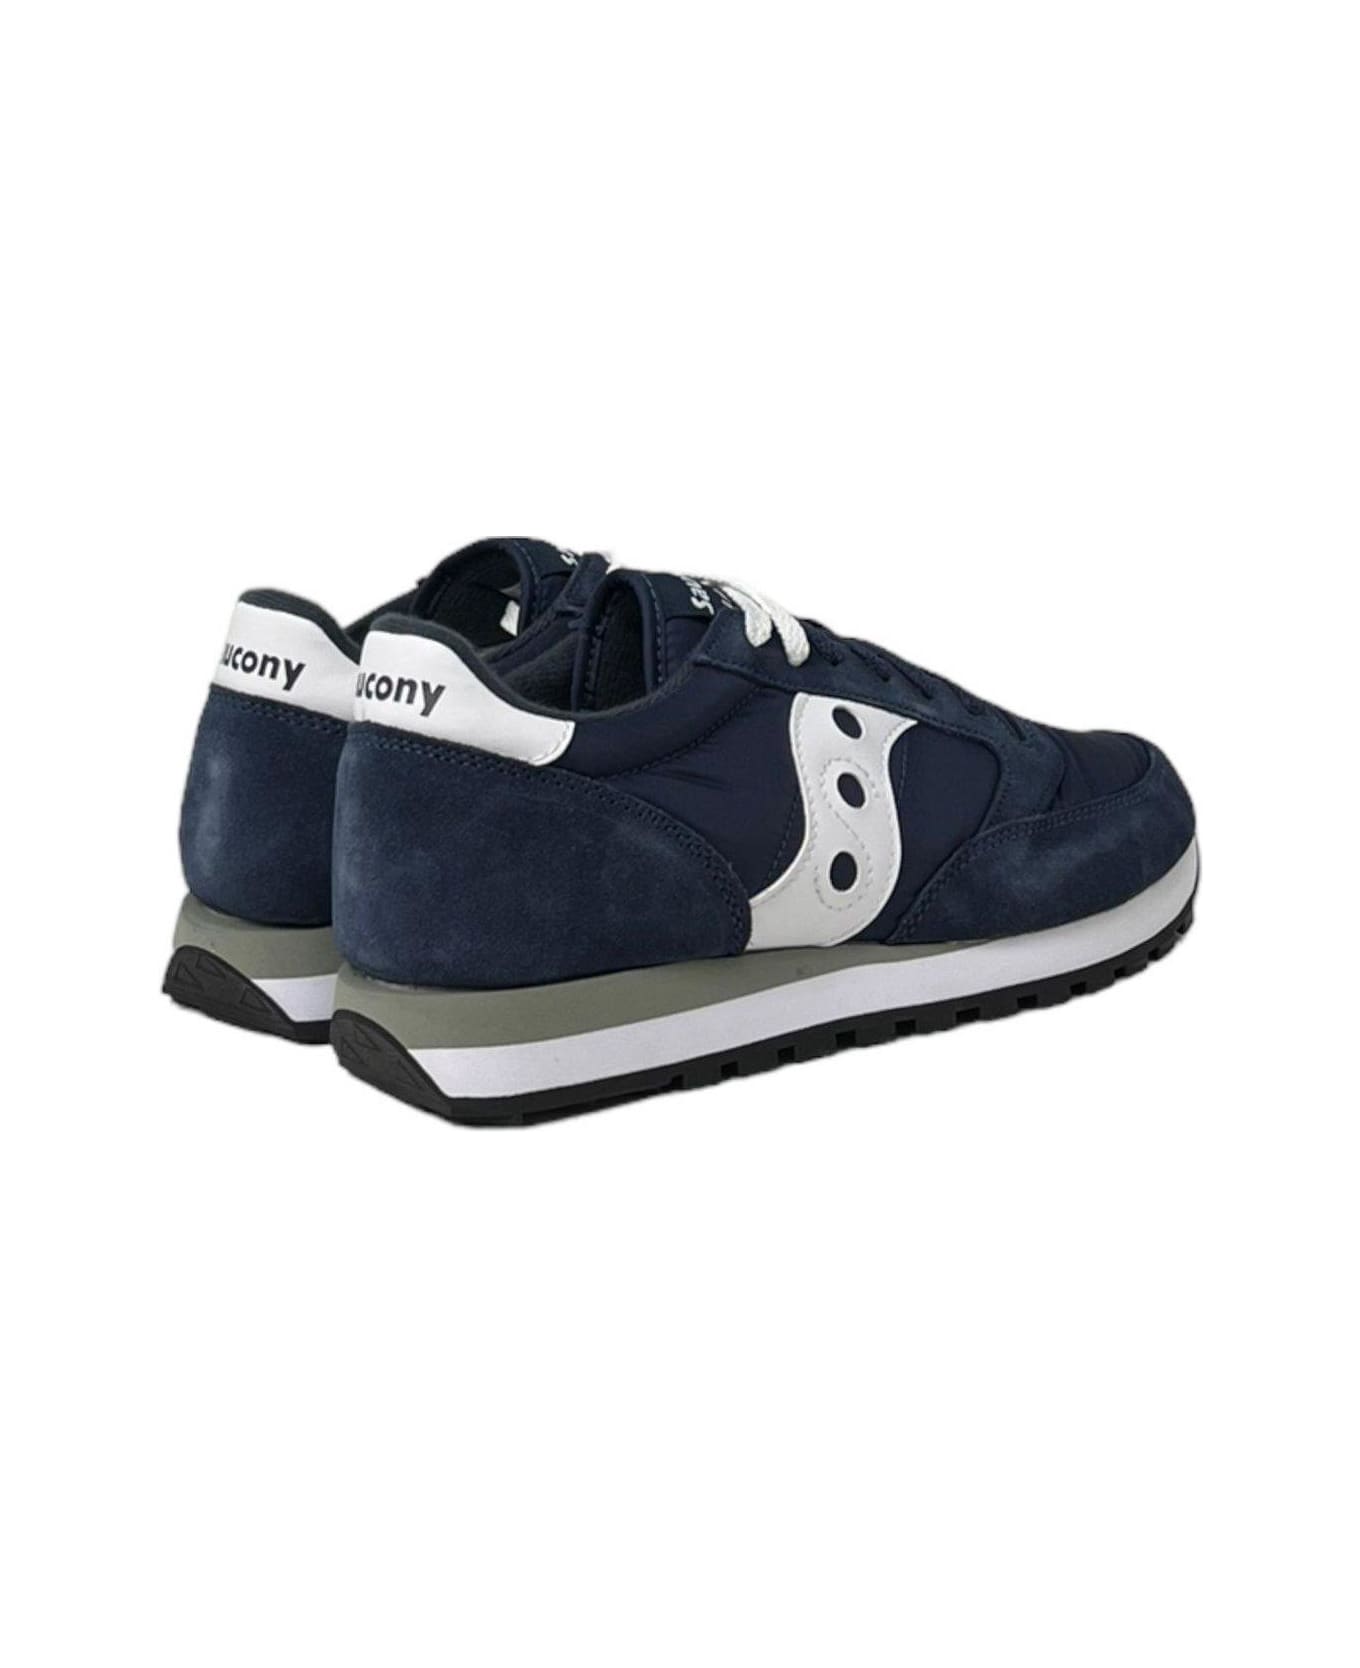 Saucony Jazz Original Lace-up Sneakers - Navy/white スニーカー